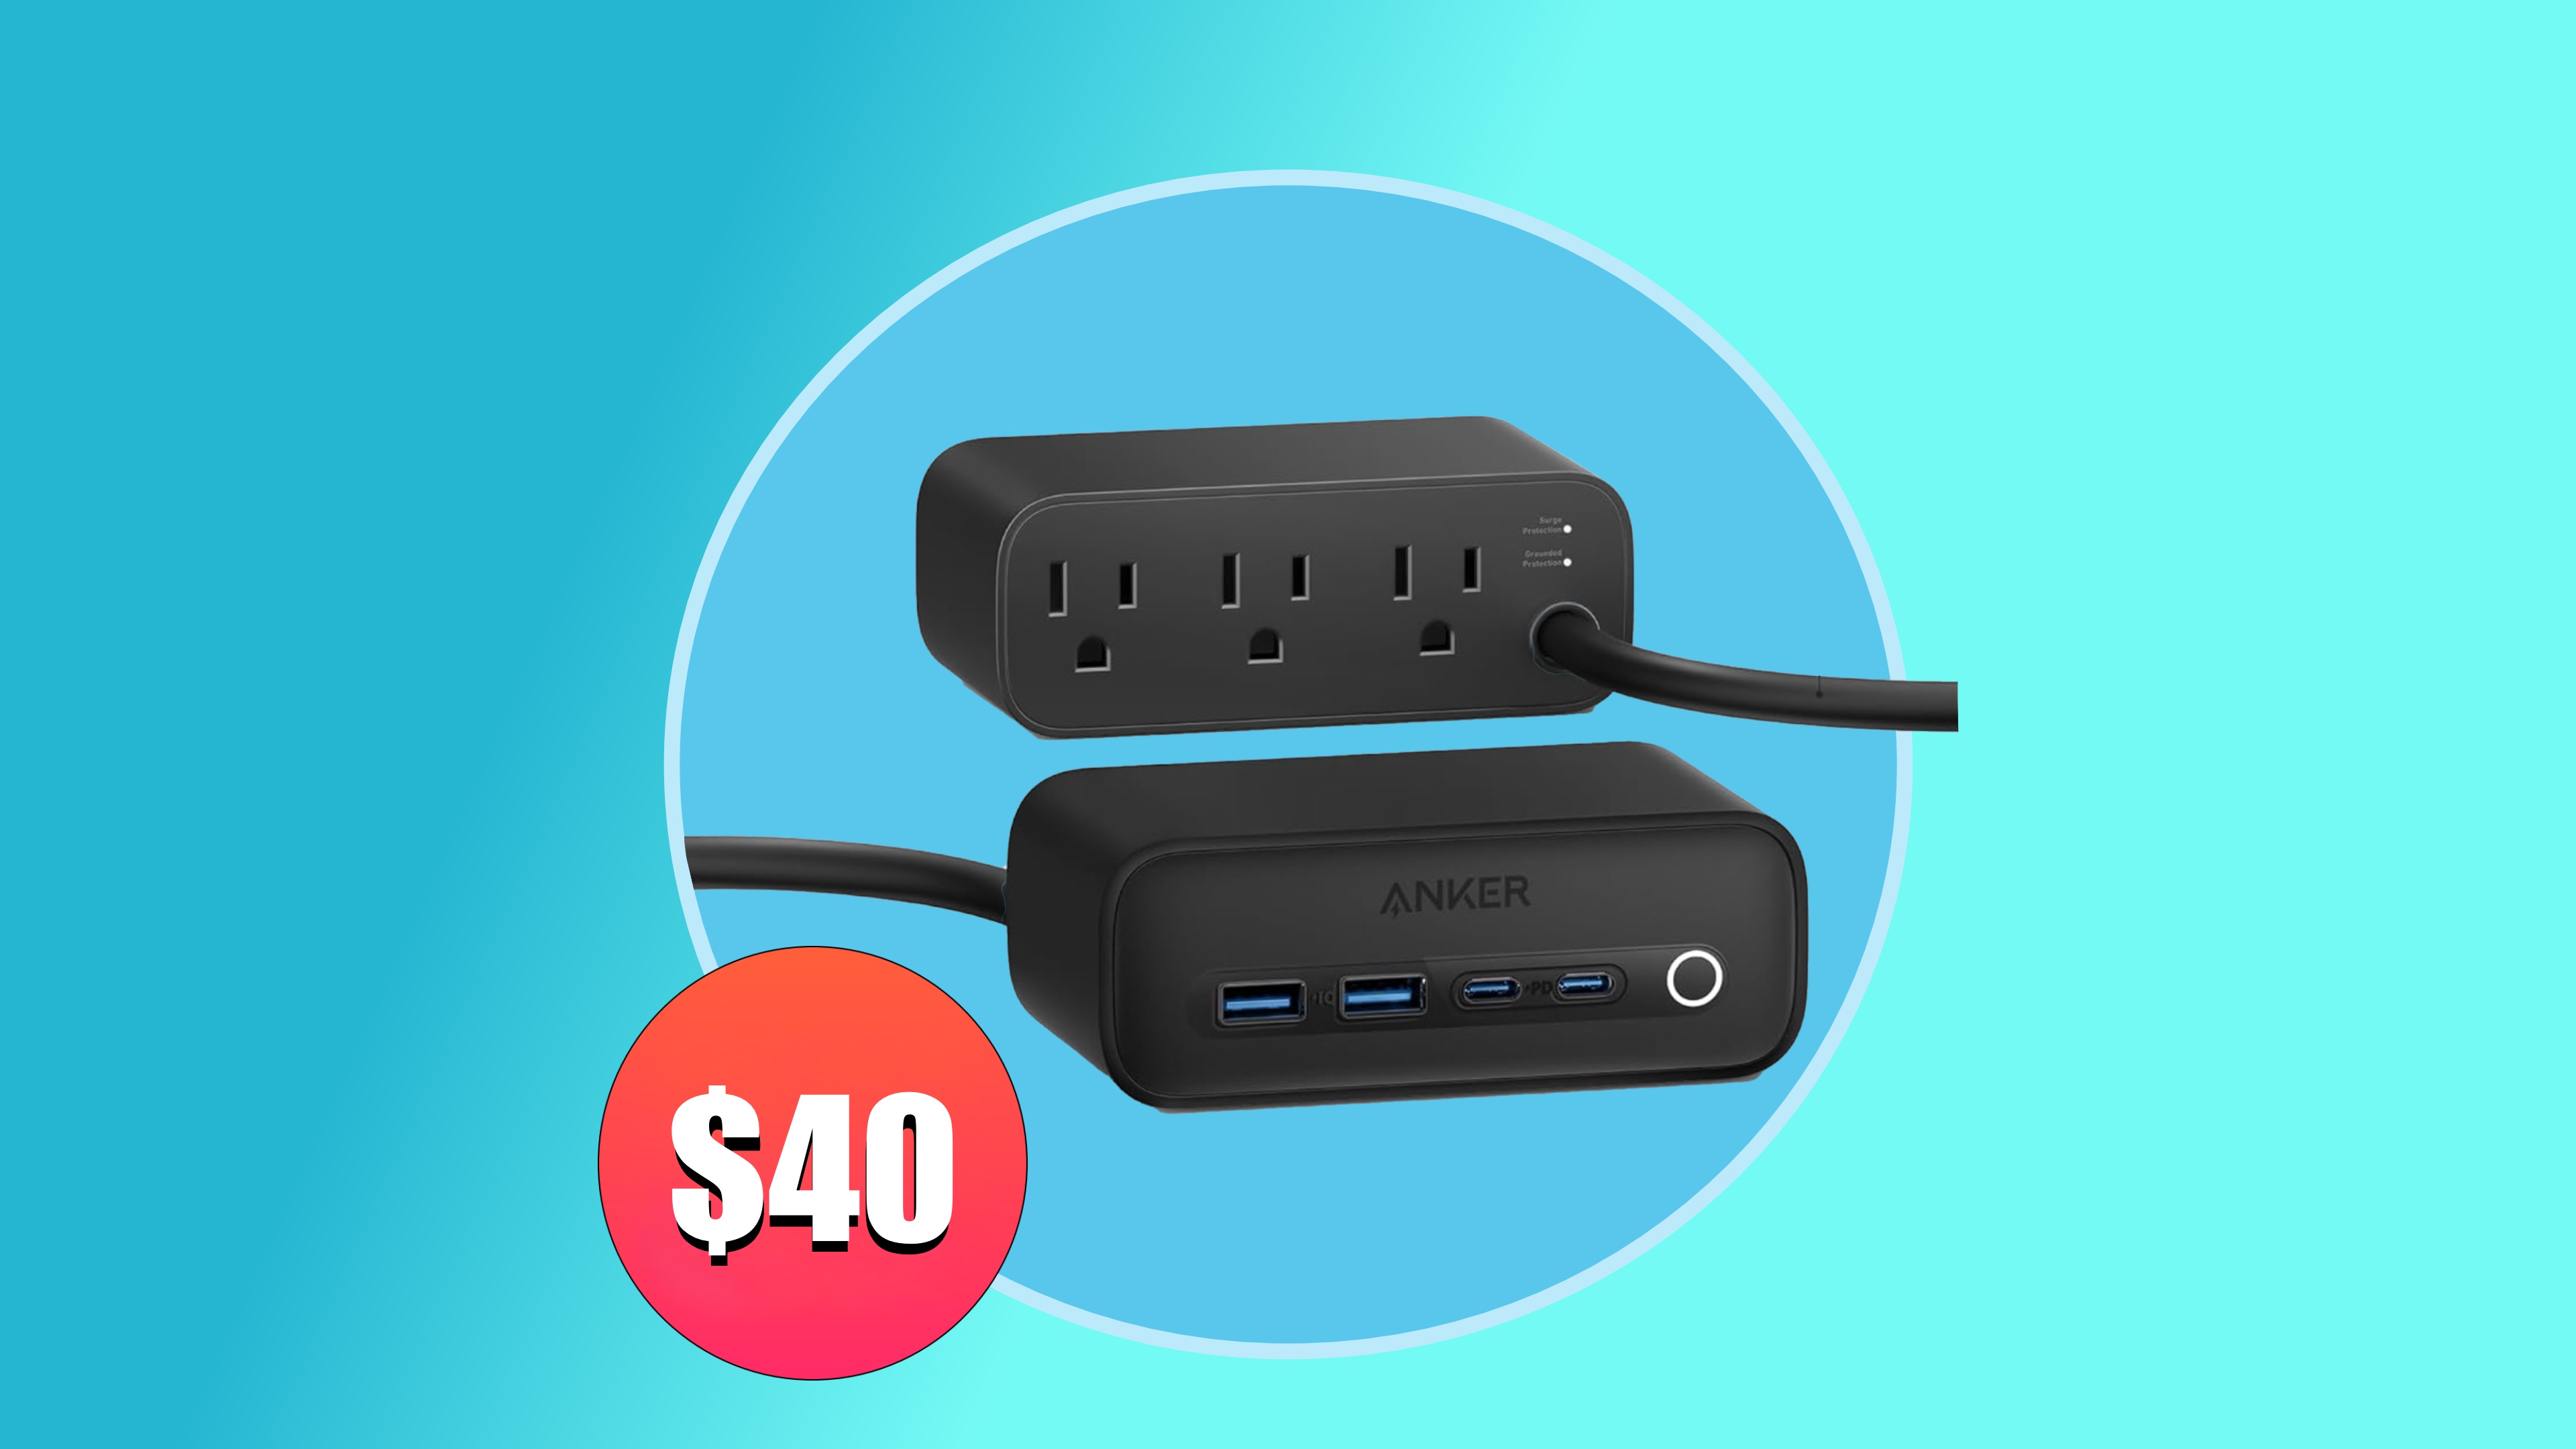 Get 40% off this powerful Anker 7-in-1 charging station